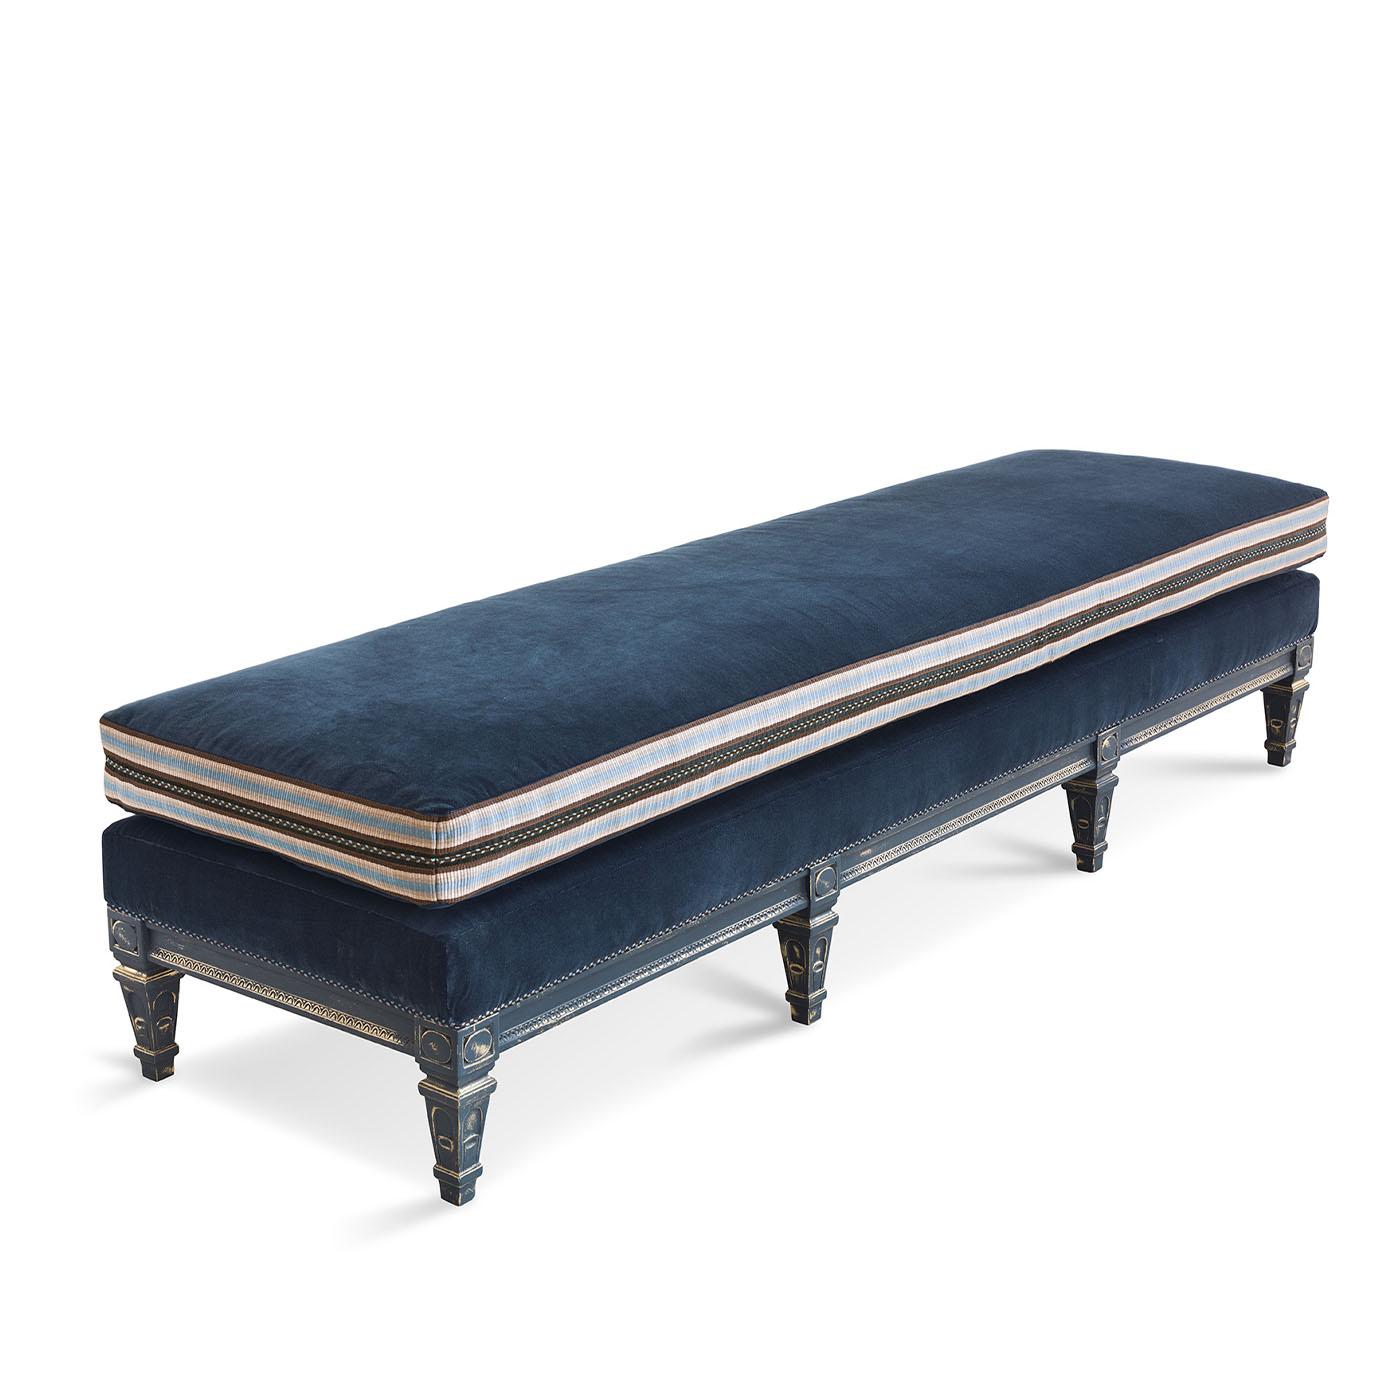 Hand-carved bench upholstered in velvet with decorative trim on seat cushion.